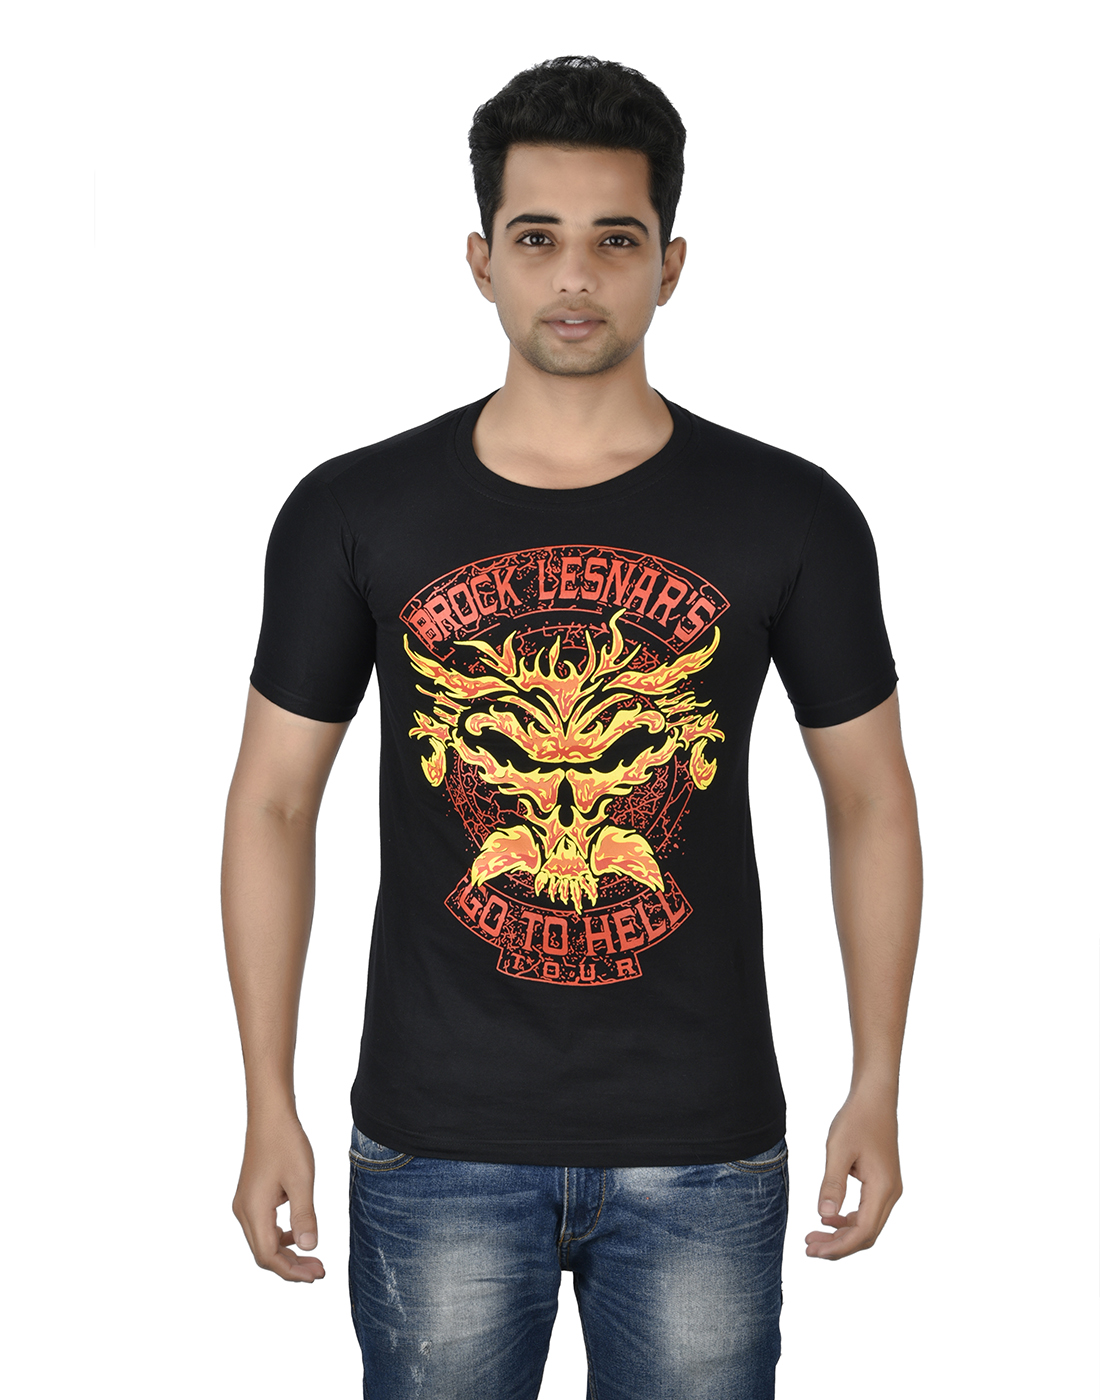 Buy Brock Lesnar Go To Hell Tour Cotton Printed T Shirt Online @ ₹399 ...